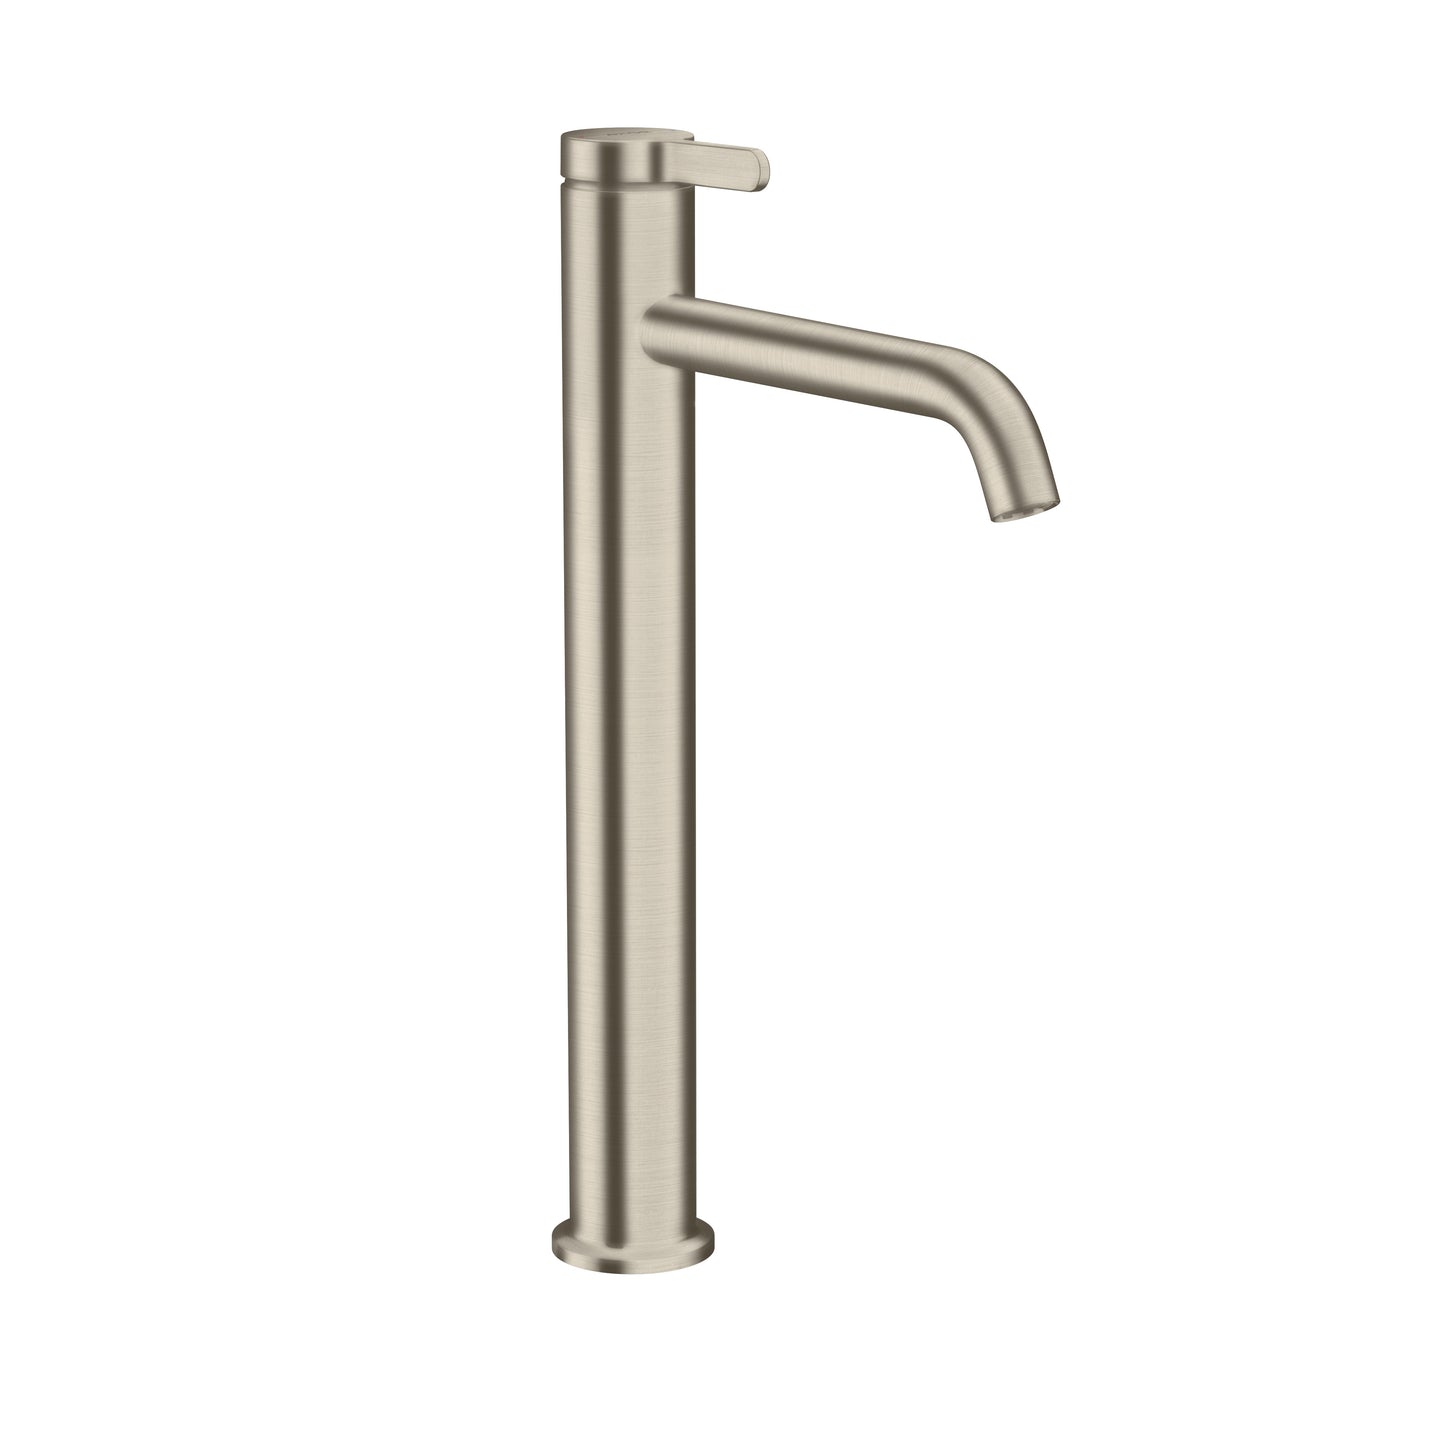 AXOR 48002821 Brushed Nickel ONE Modern Single Hole Bathroom Faucet 1.2 GPM